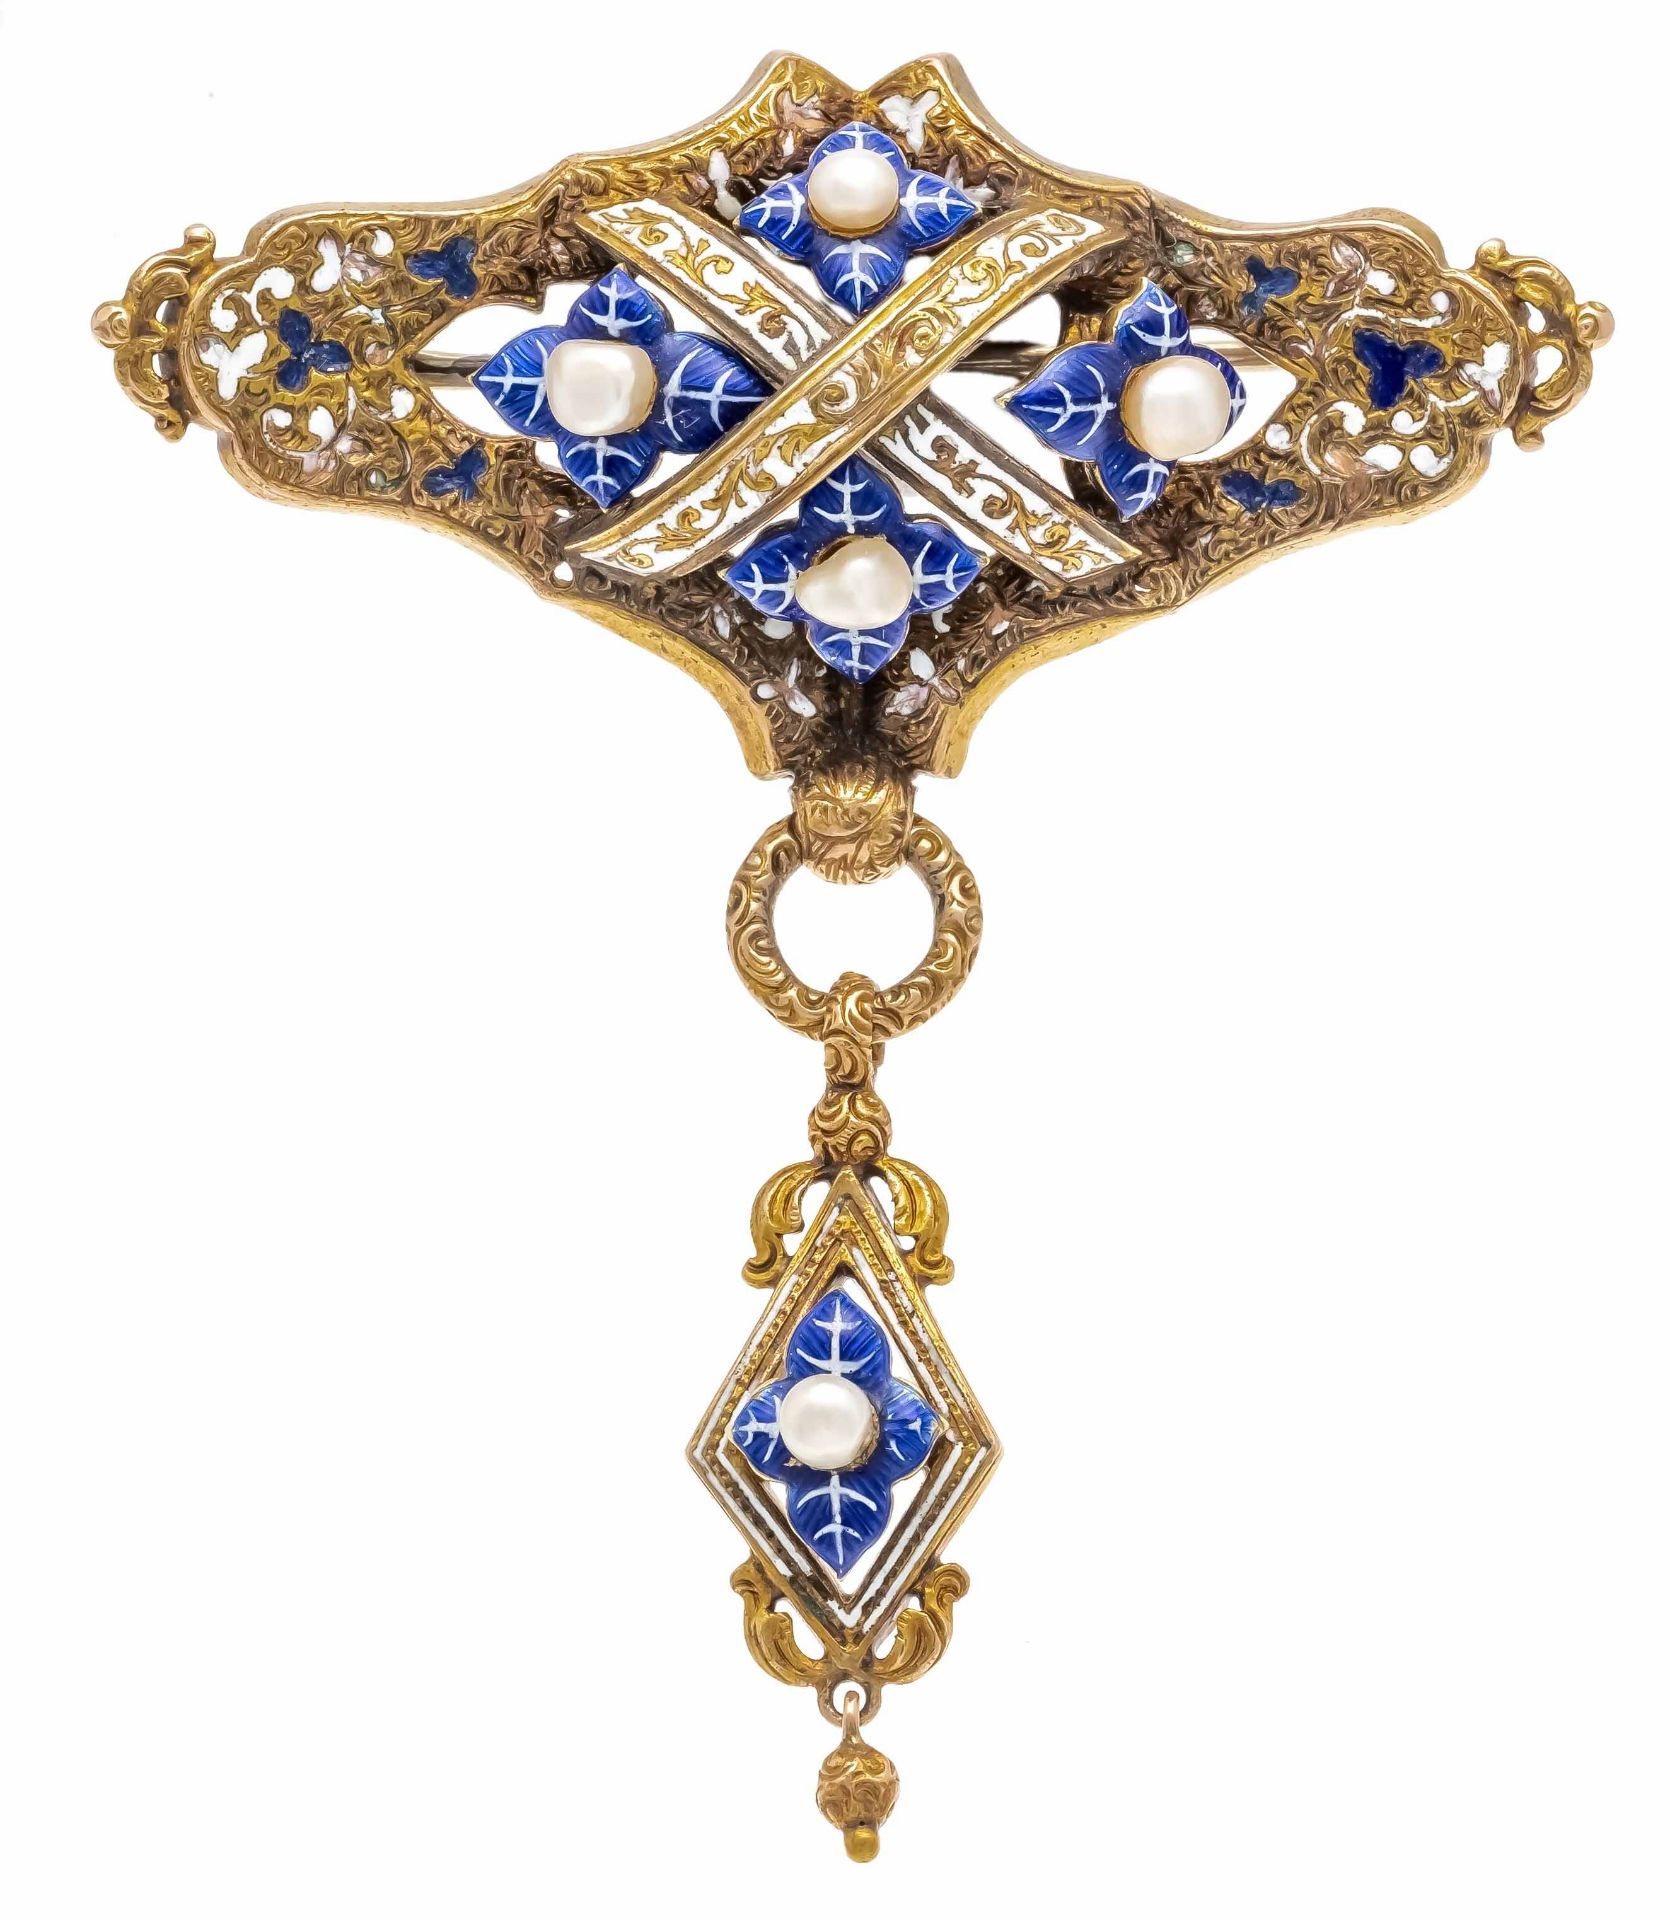 Enamel brooch c. 1850 GG 585/000 unstamped, tested, finely chased floral tendrils and diamond-shaped - Image 3 of 4